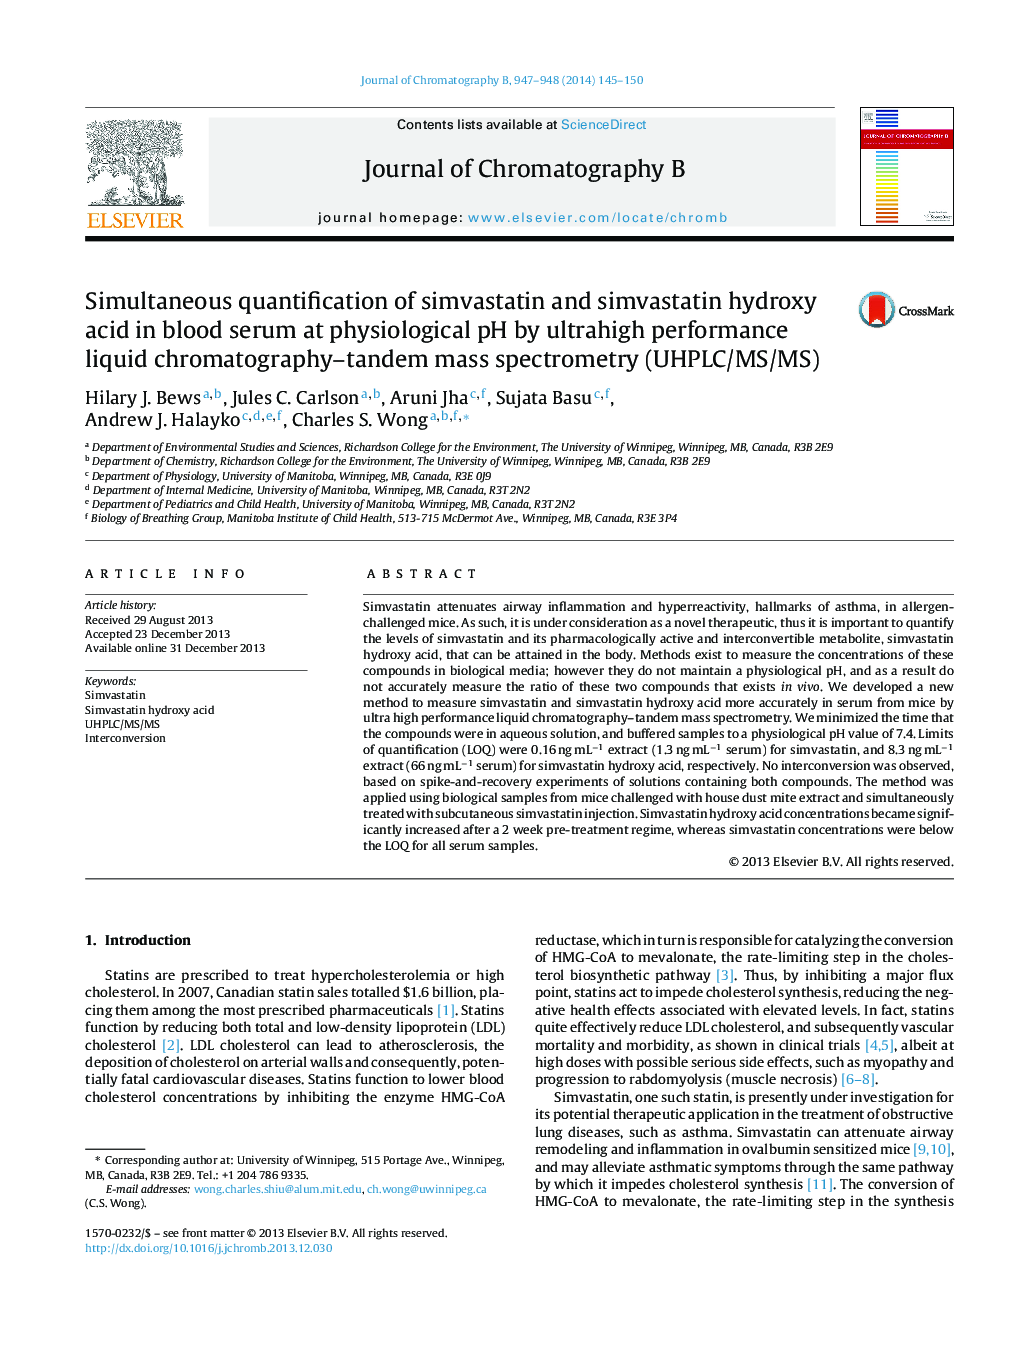 Simultaneous quantification of simvastatin and simvastatin hydroxy acid in blood serum at physiological pH by ultrahigh performance liquid chromatography–tandem mass spectrometry (UHPLC/MS/MS)